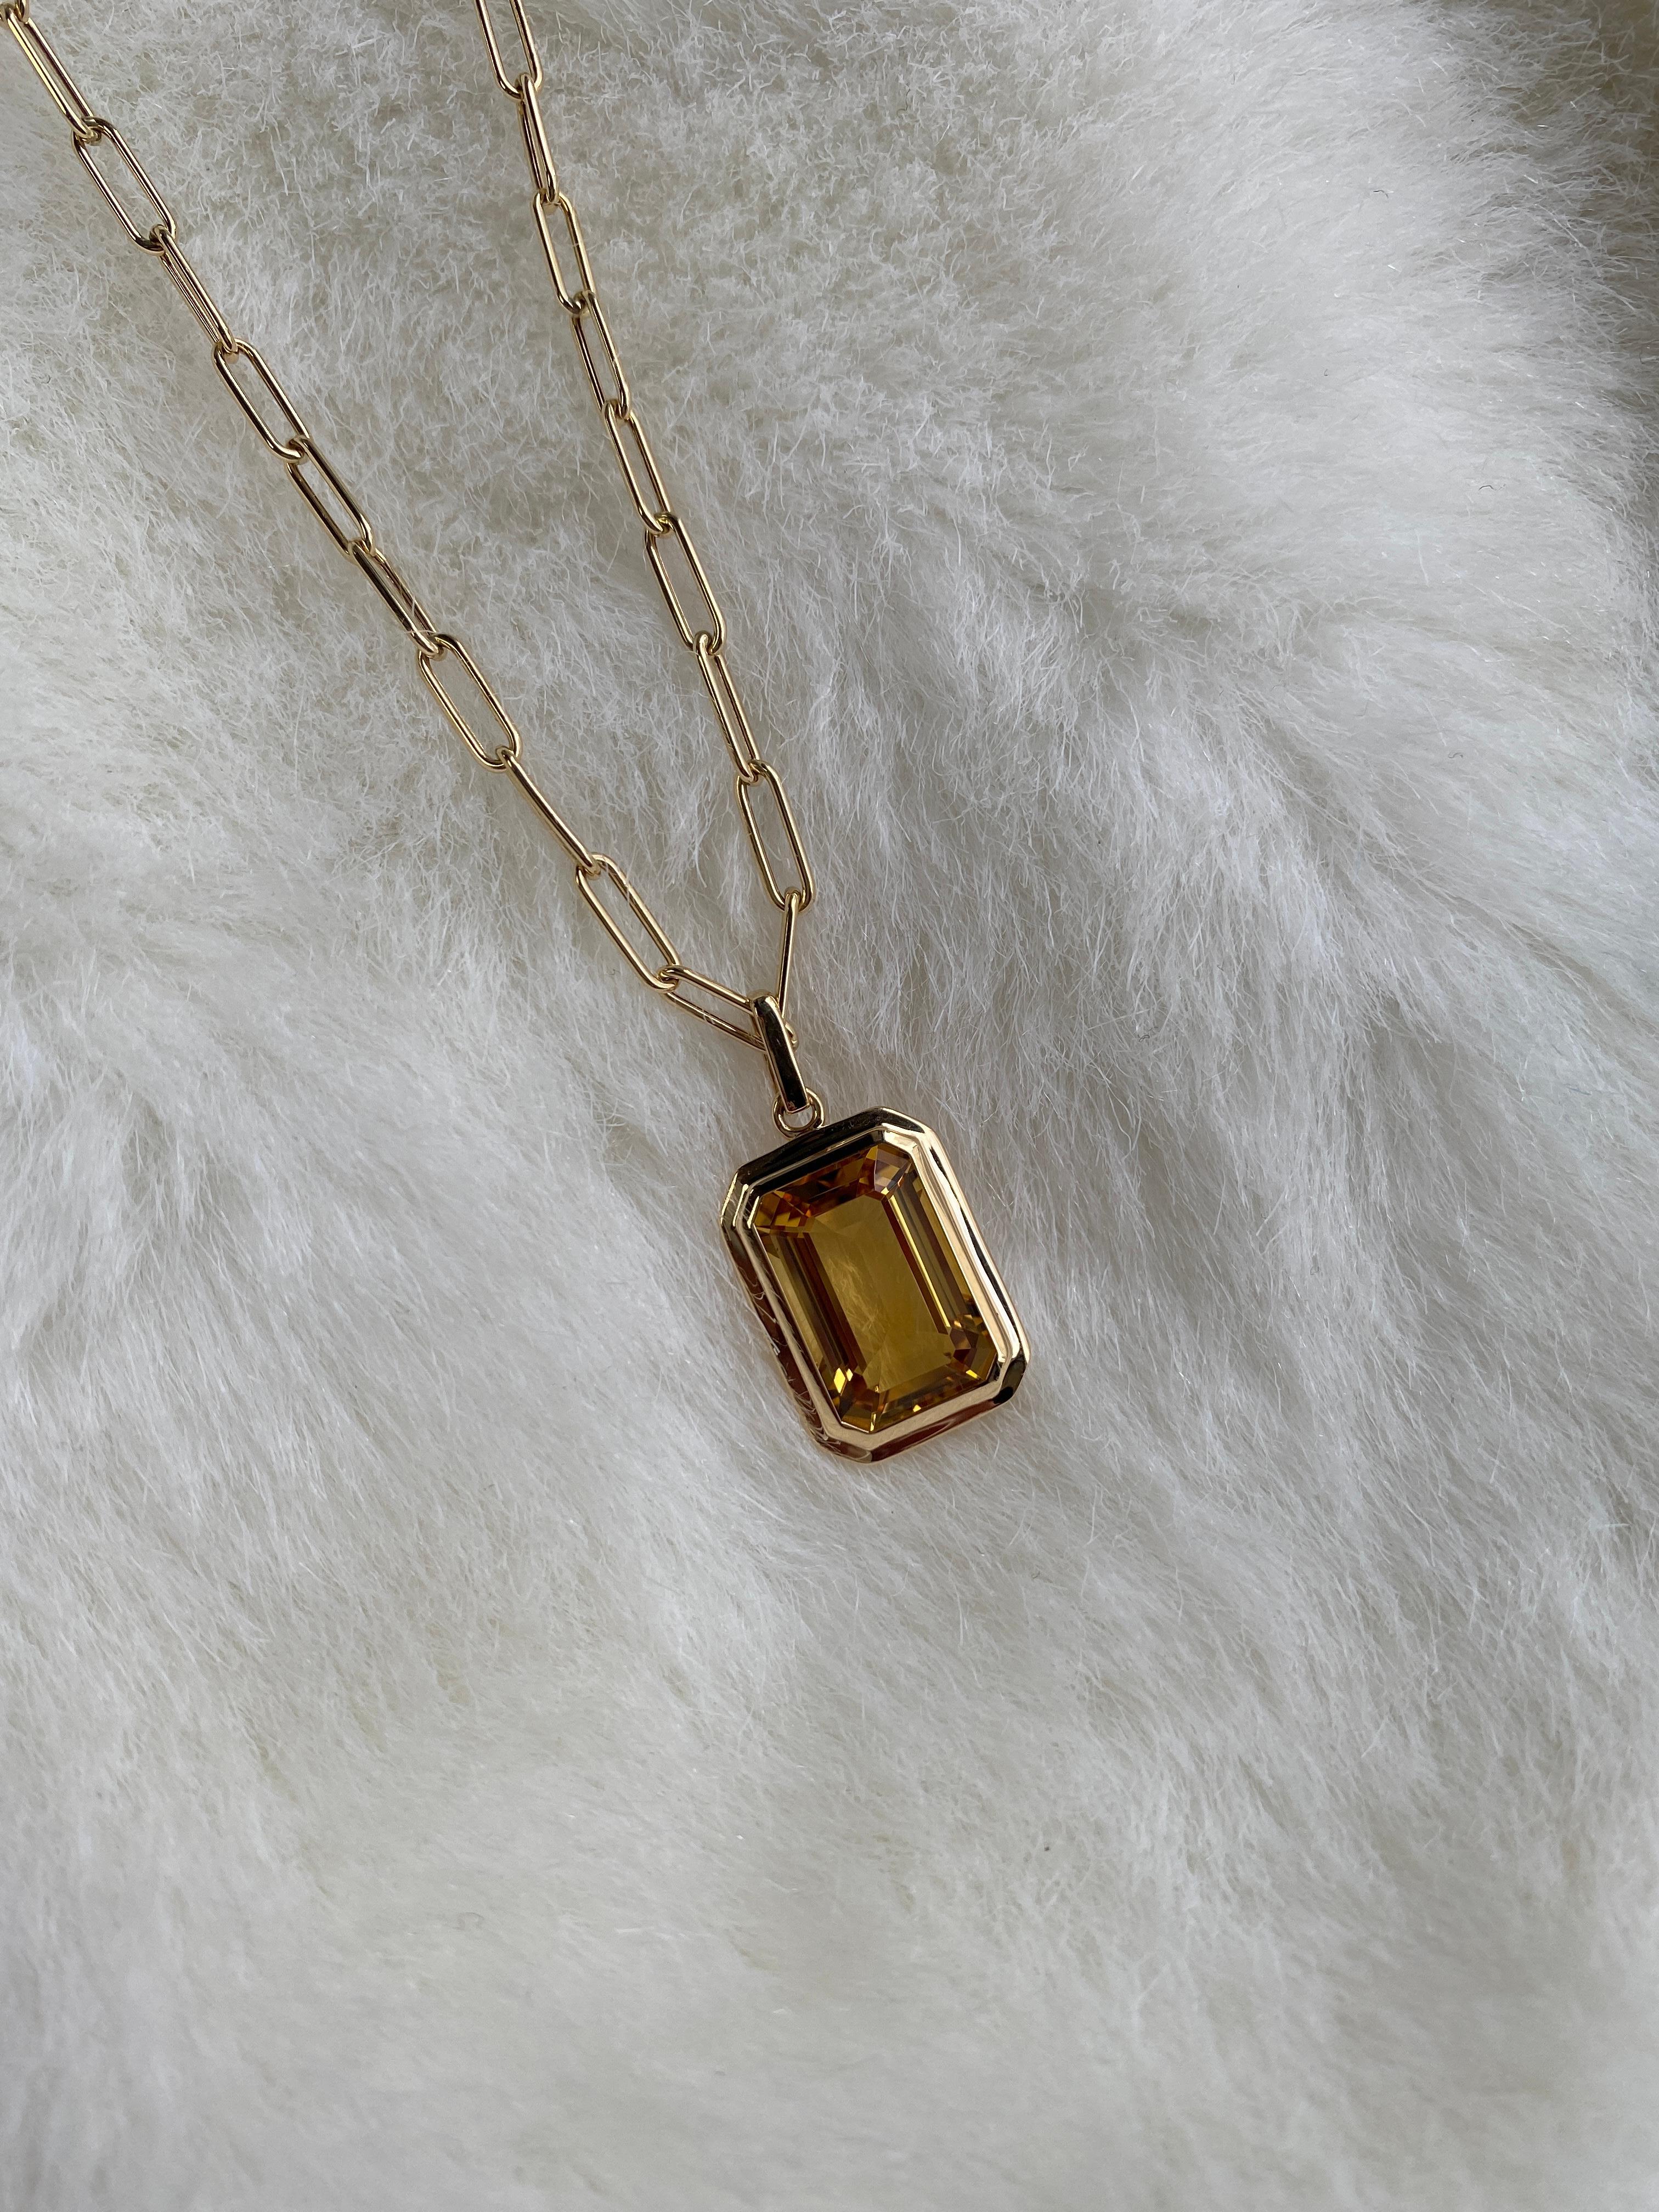 This beautiful Citrine Emerald Cut Bezel Set Pendant in 18K Yellow Gold is from our ‘Manhattan’ Collection. Minimalist lines yet bold structures are what our Manhattan Collection is all about. Our pieces represent the famous skyline and cityscapes